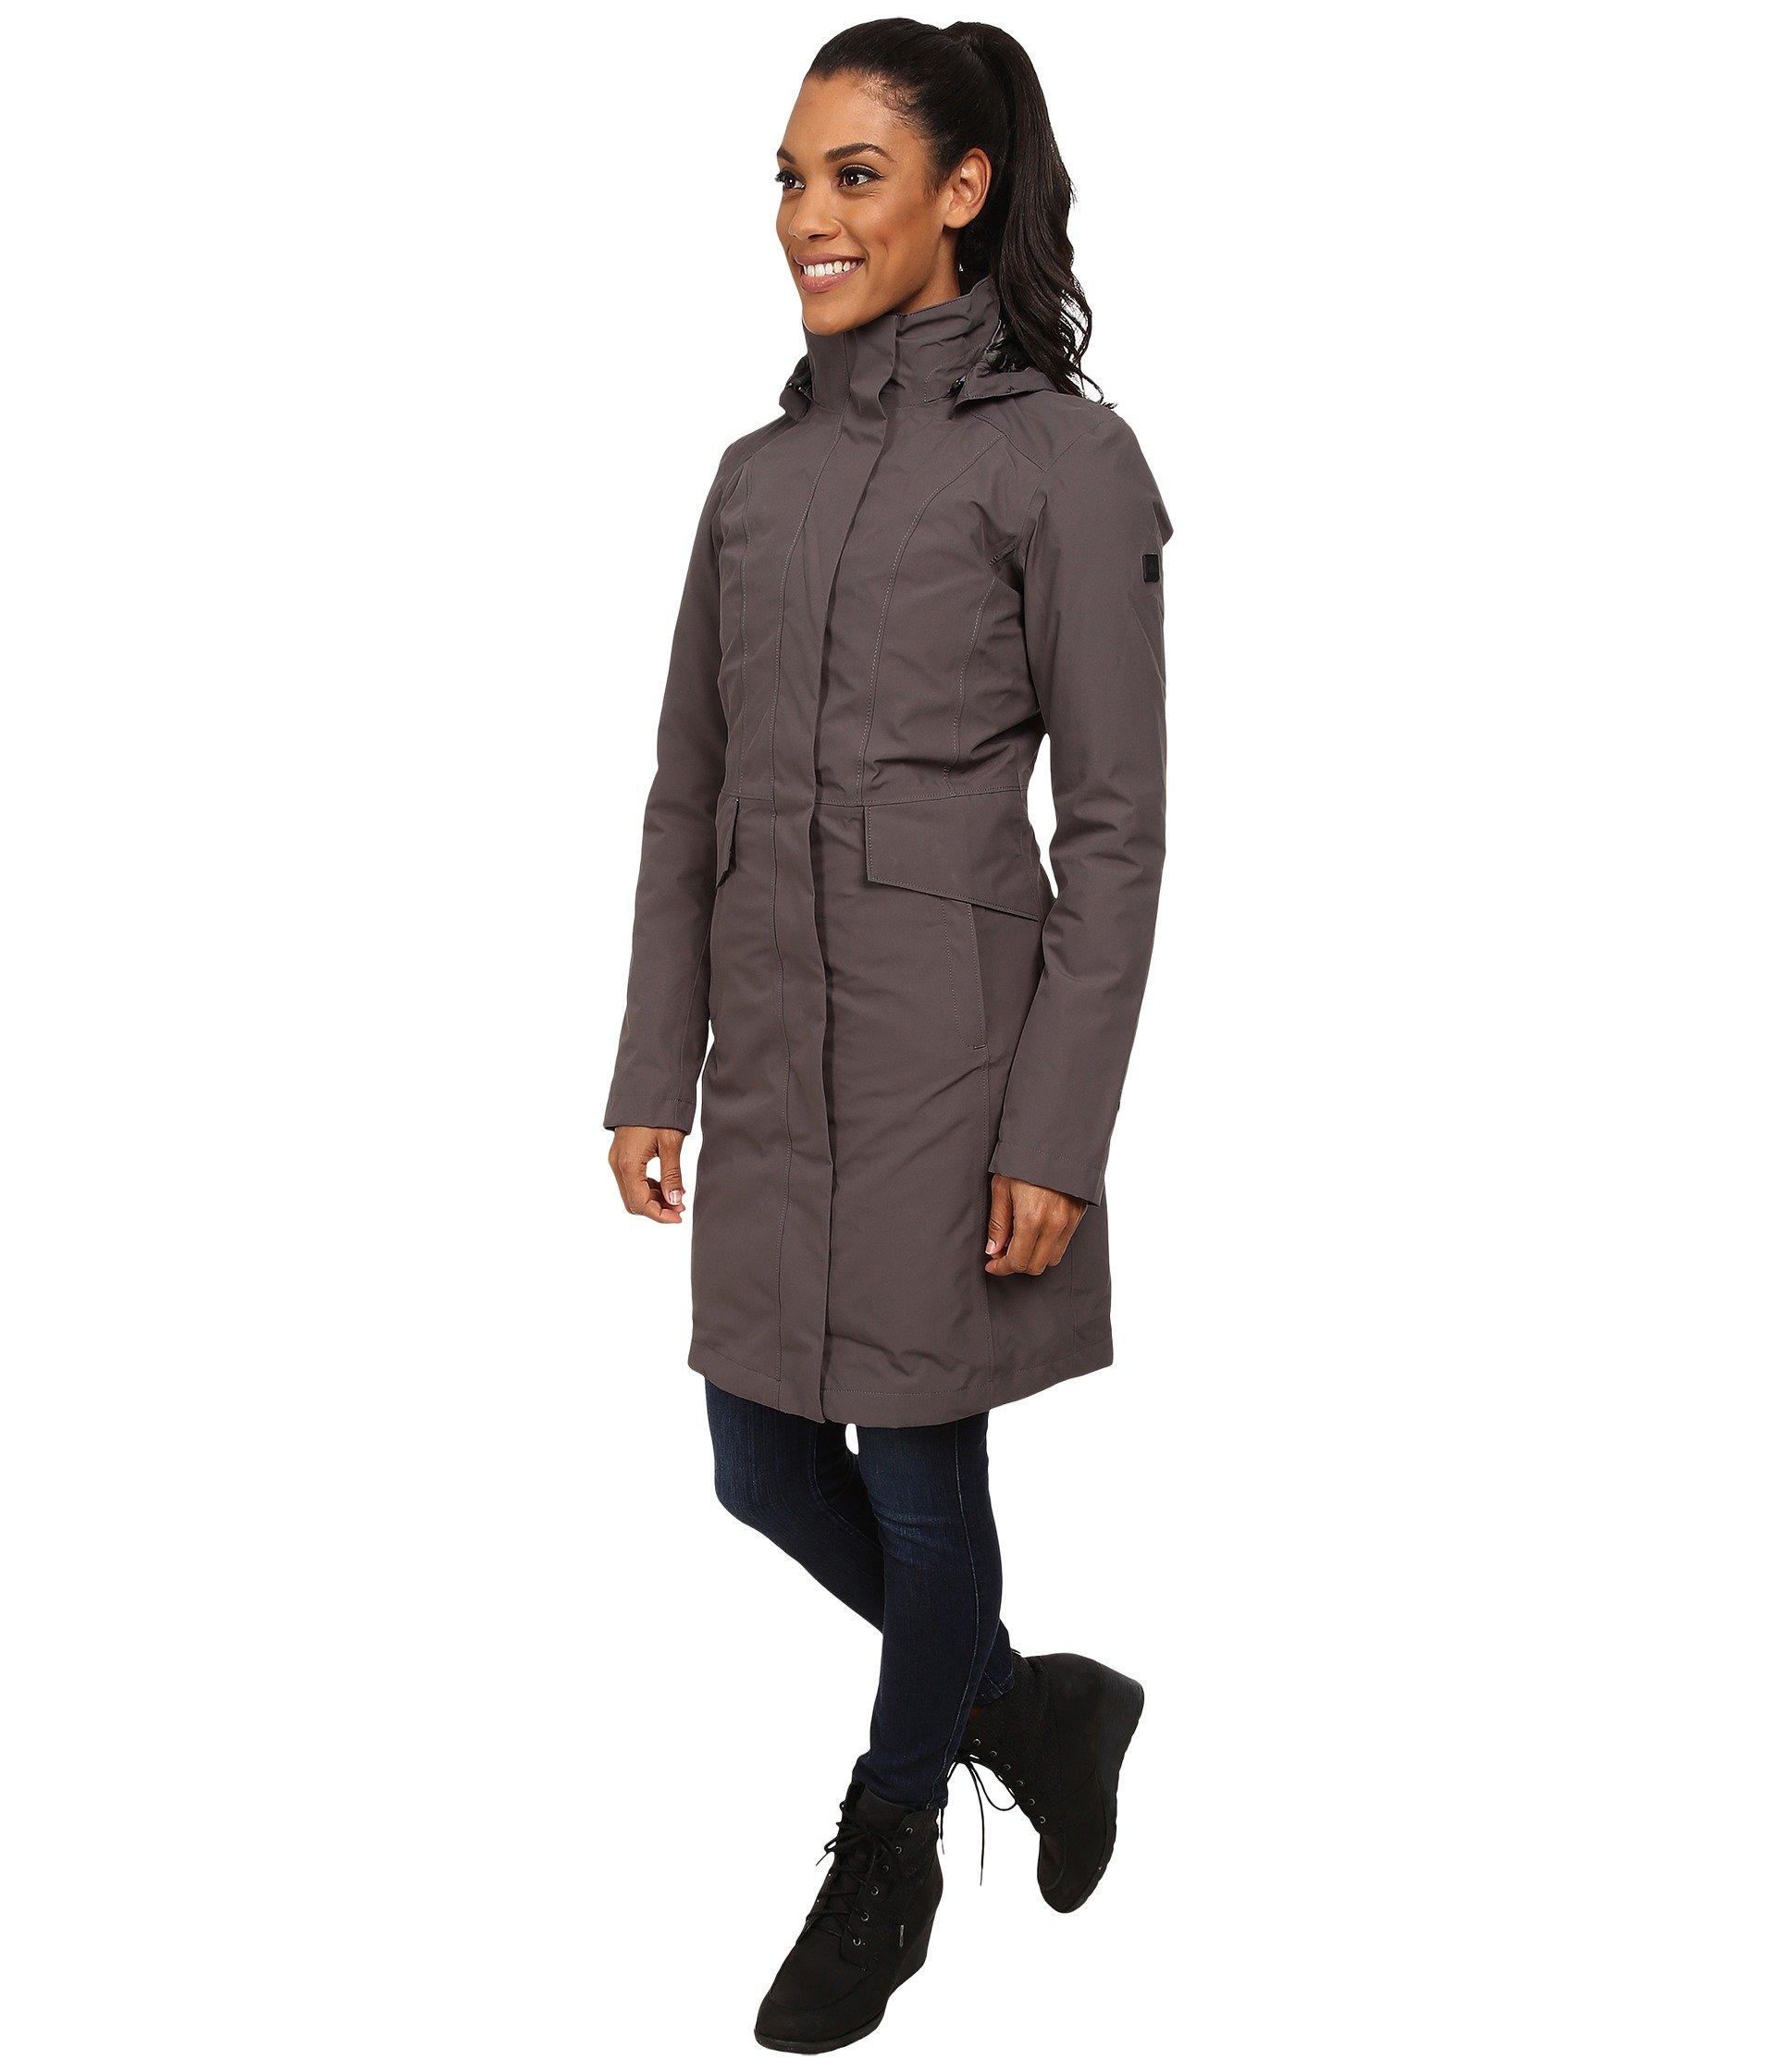 north face suzanne triclimate coat